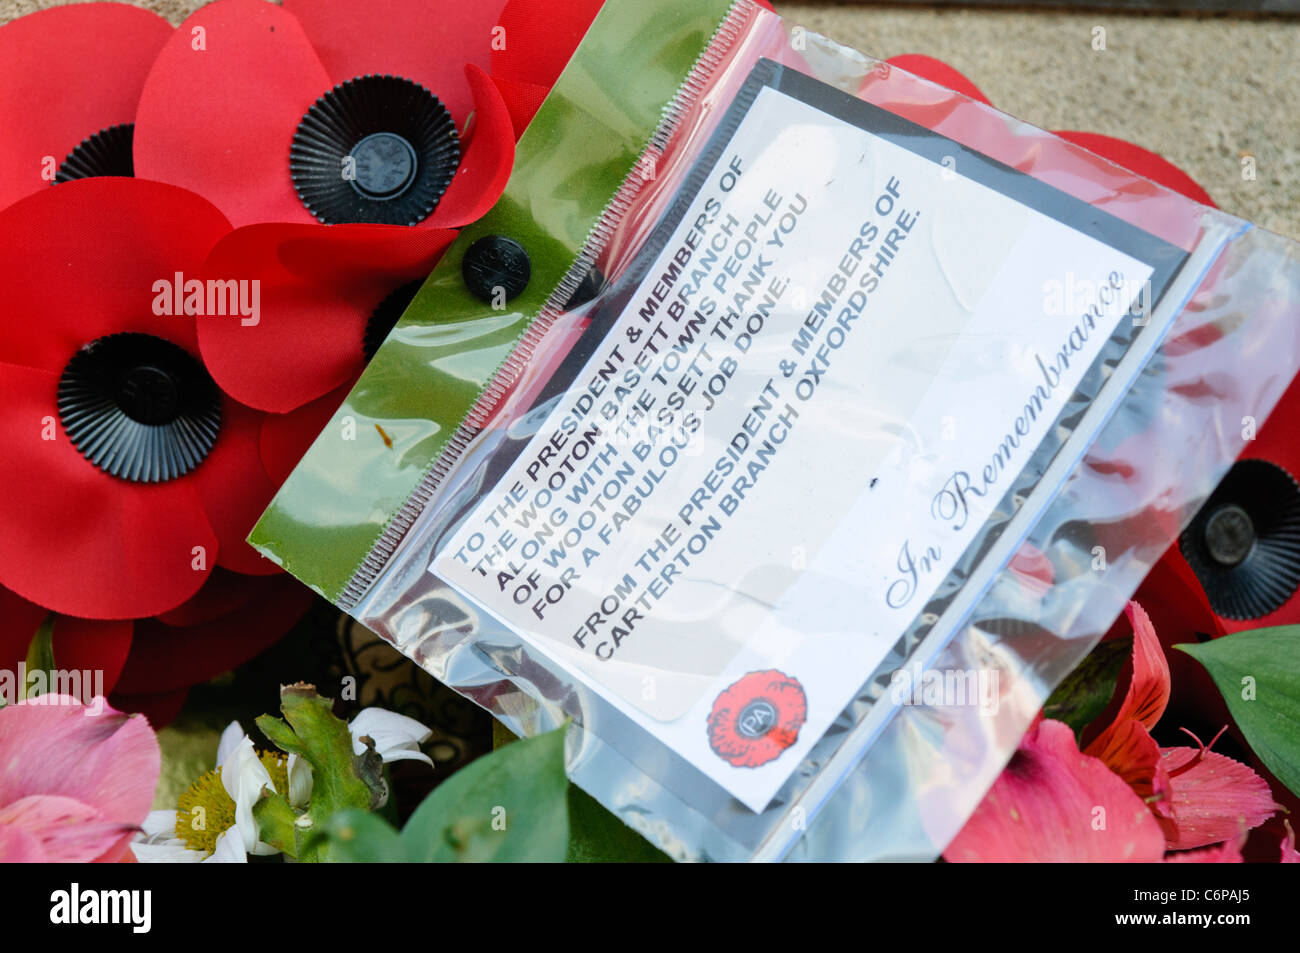 Wreaths and other items left on the ground around Royal Wootton Bassett war memorial. Stock Photo